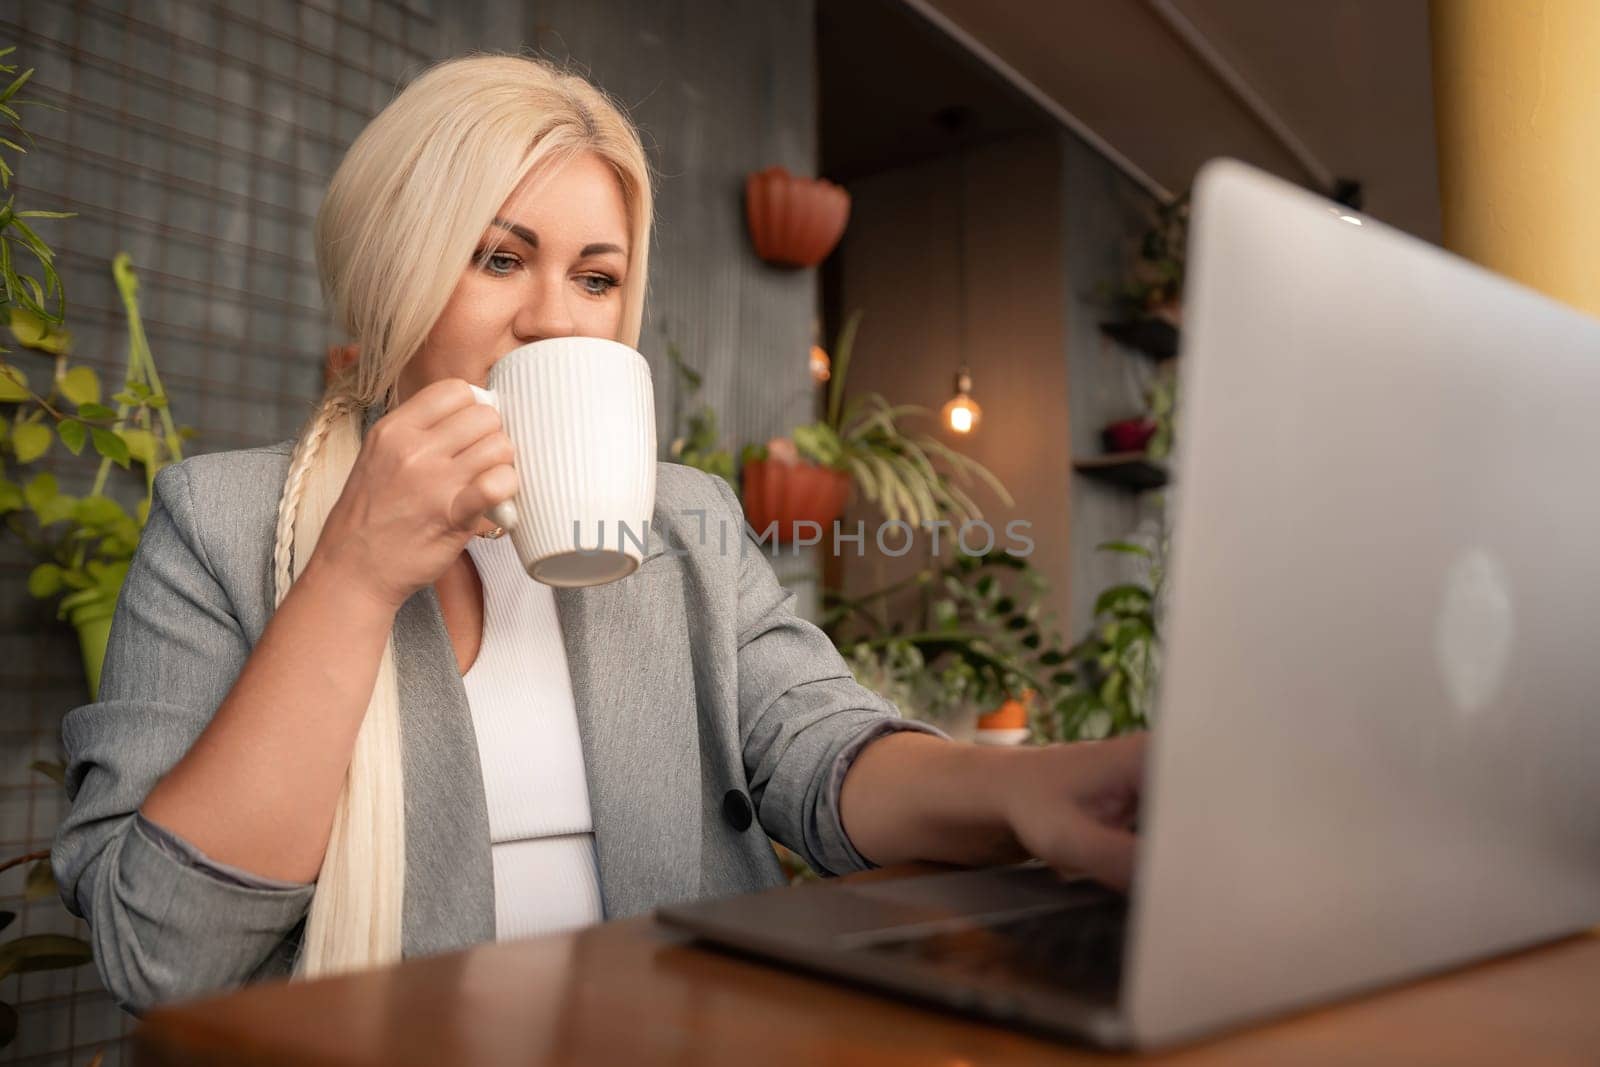 A woman is sitting at a table with a laptop and a white coffee cup. She is drinking coffee while working on her laptop